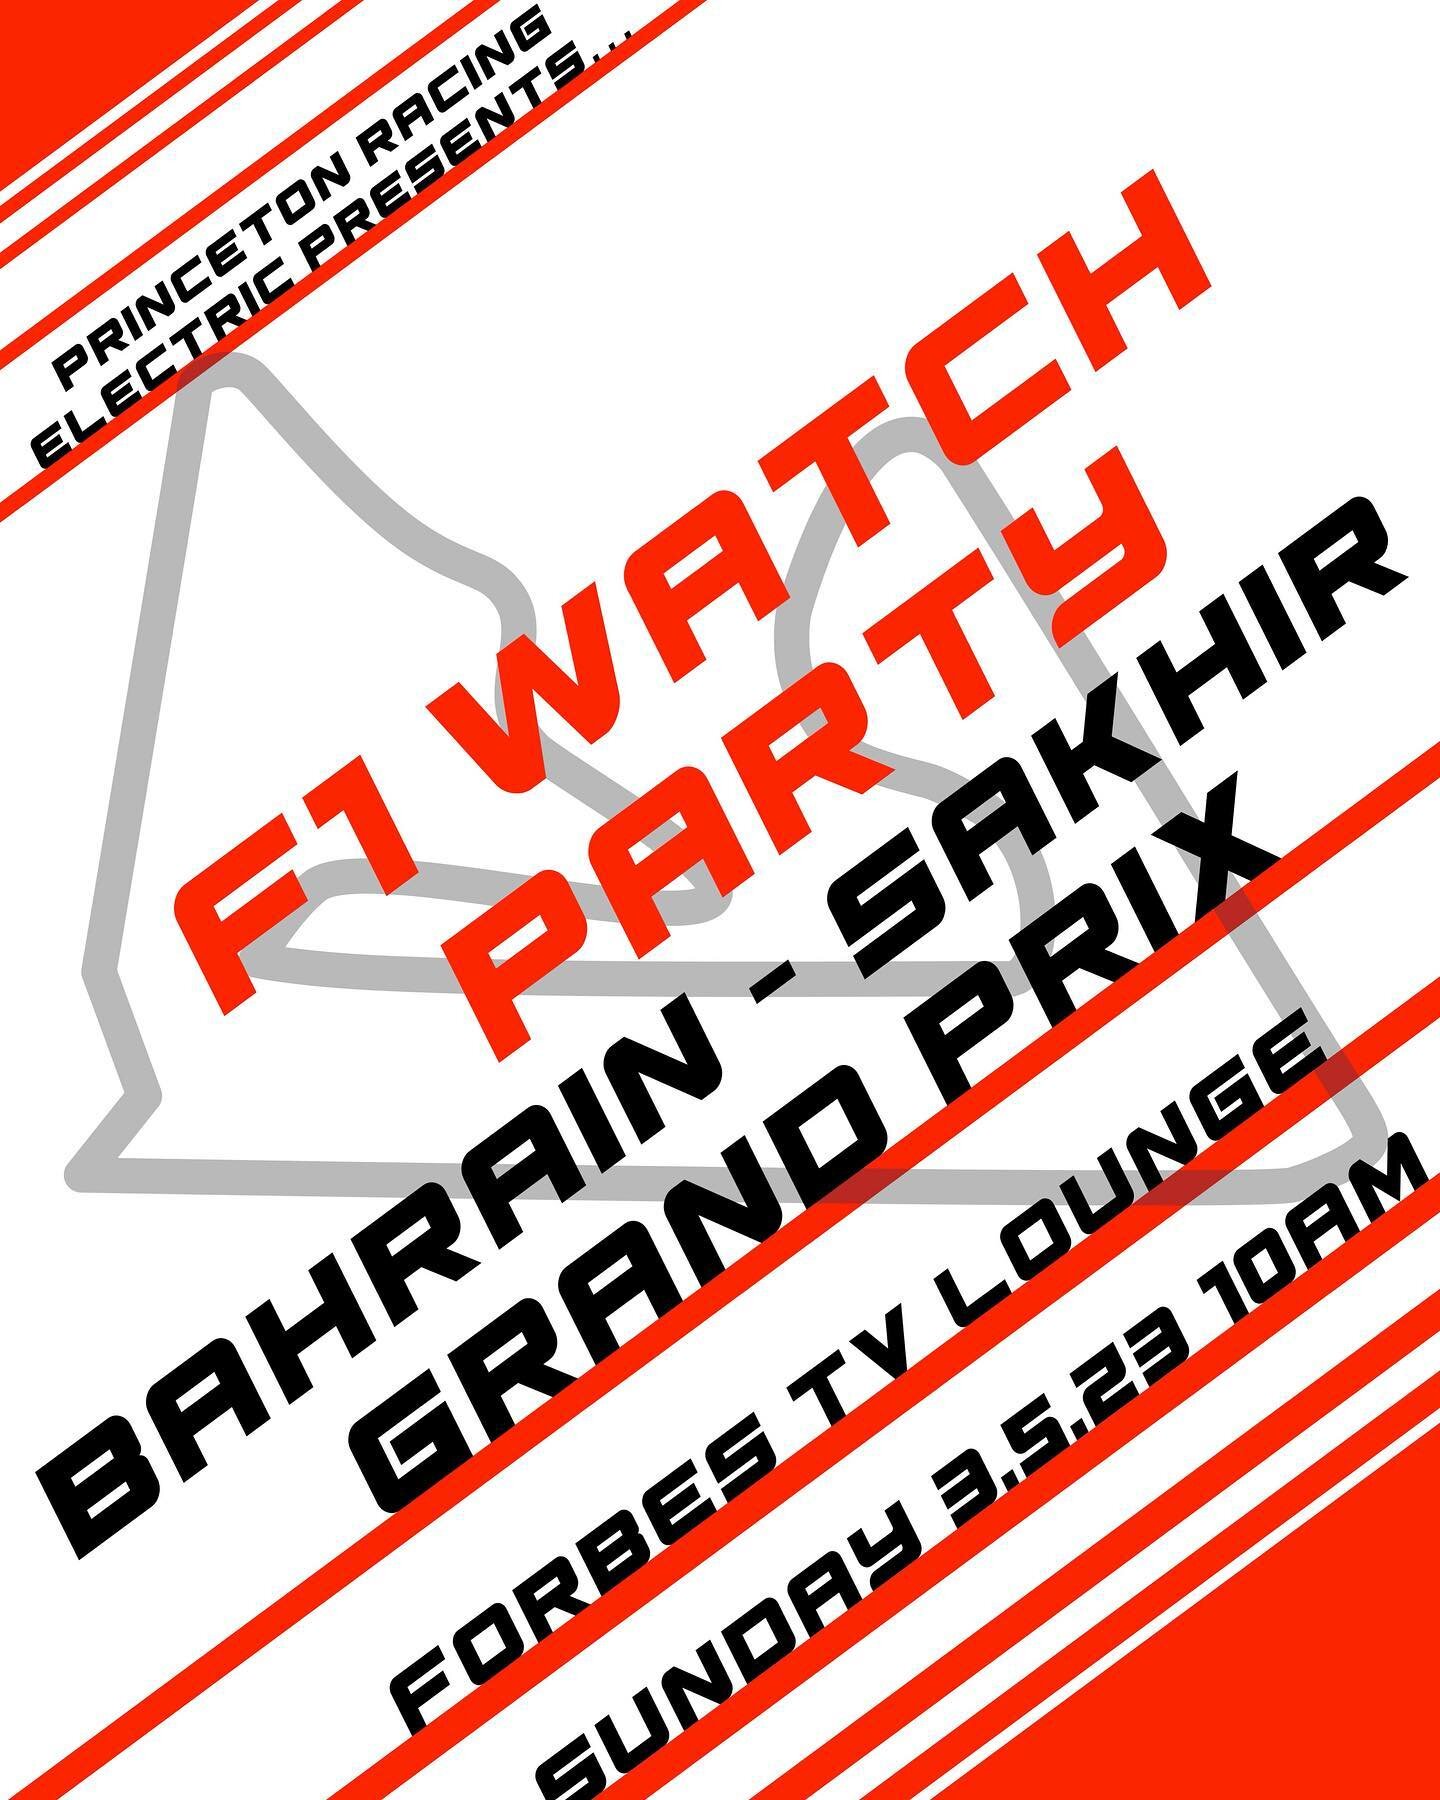 join us on Sunday for the first F1 watch party of the season!